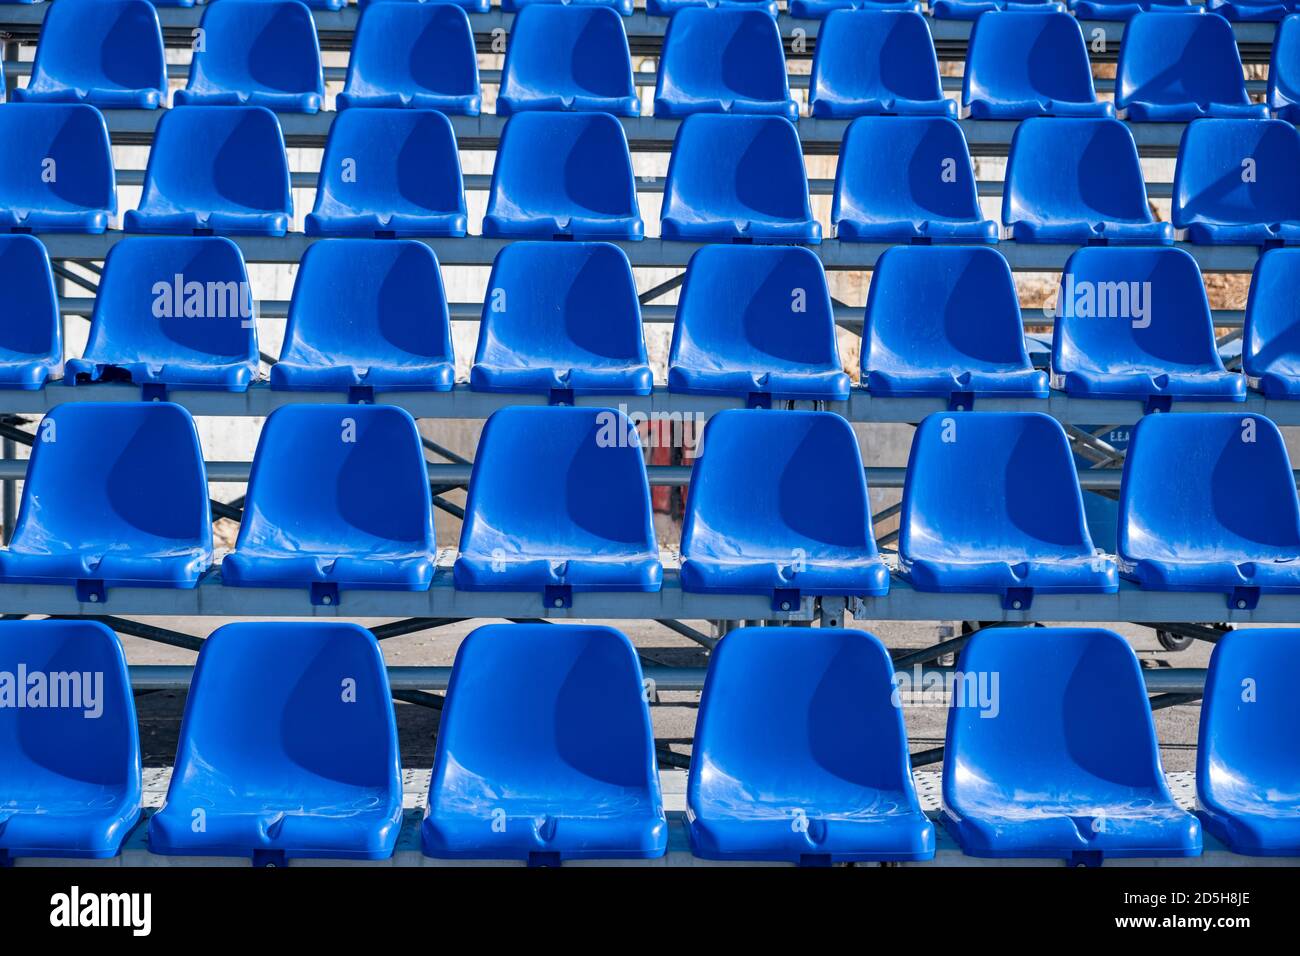 https://c8.alamy.com/comp/2D5H8JE/stadium-seats-background-rows-of-blue-plastic-empty-seats-sports-or-concerts-audience-chairs-2D5H8JE.jpg